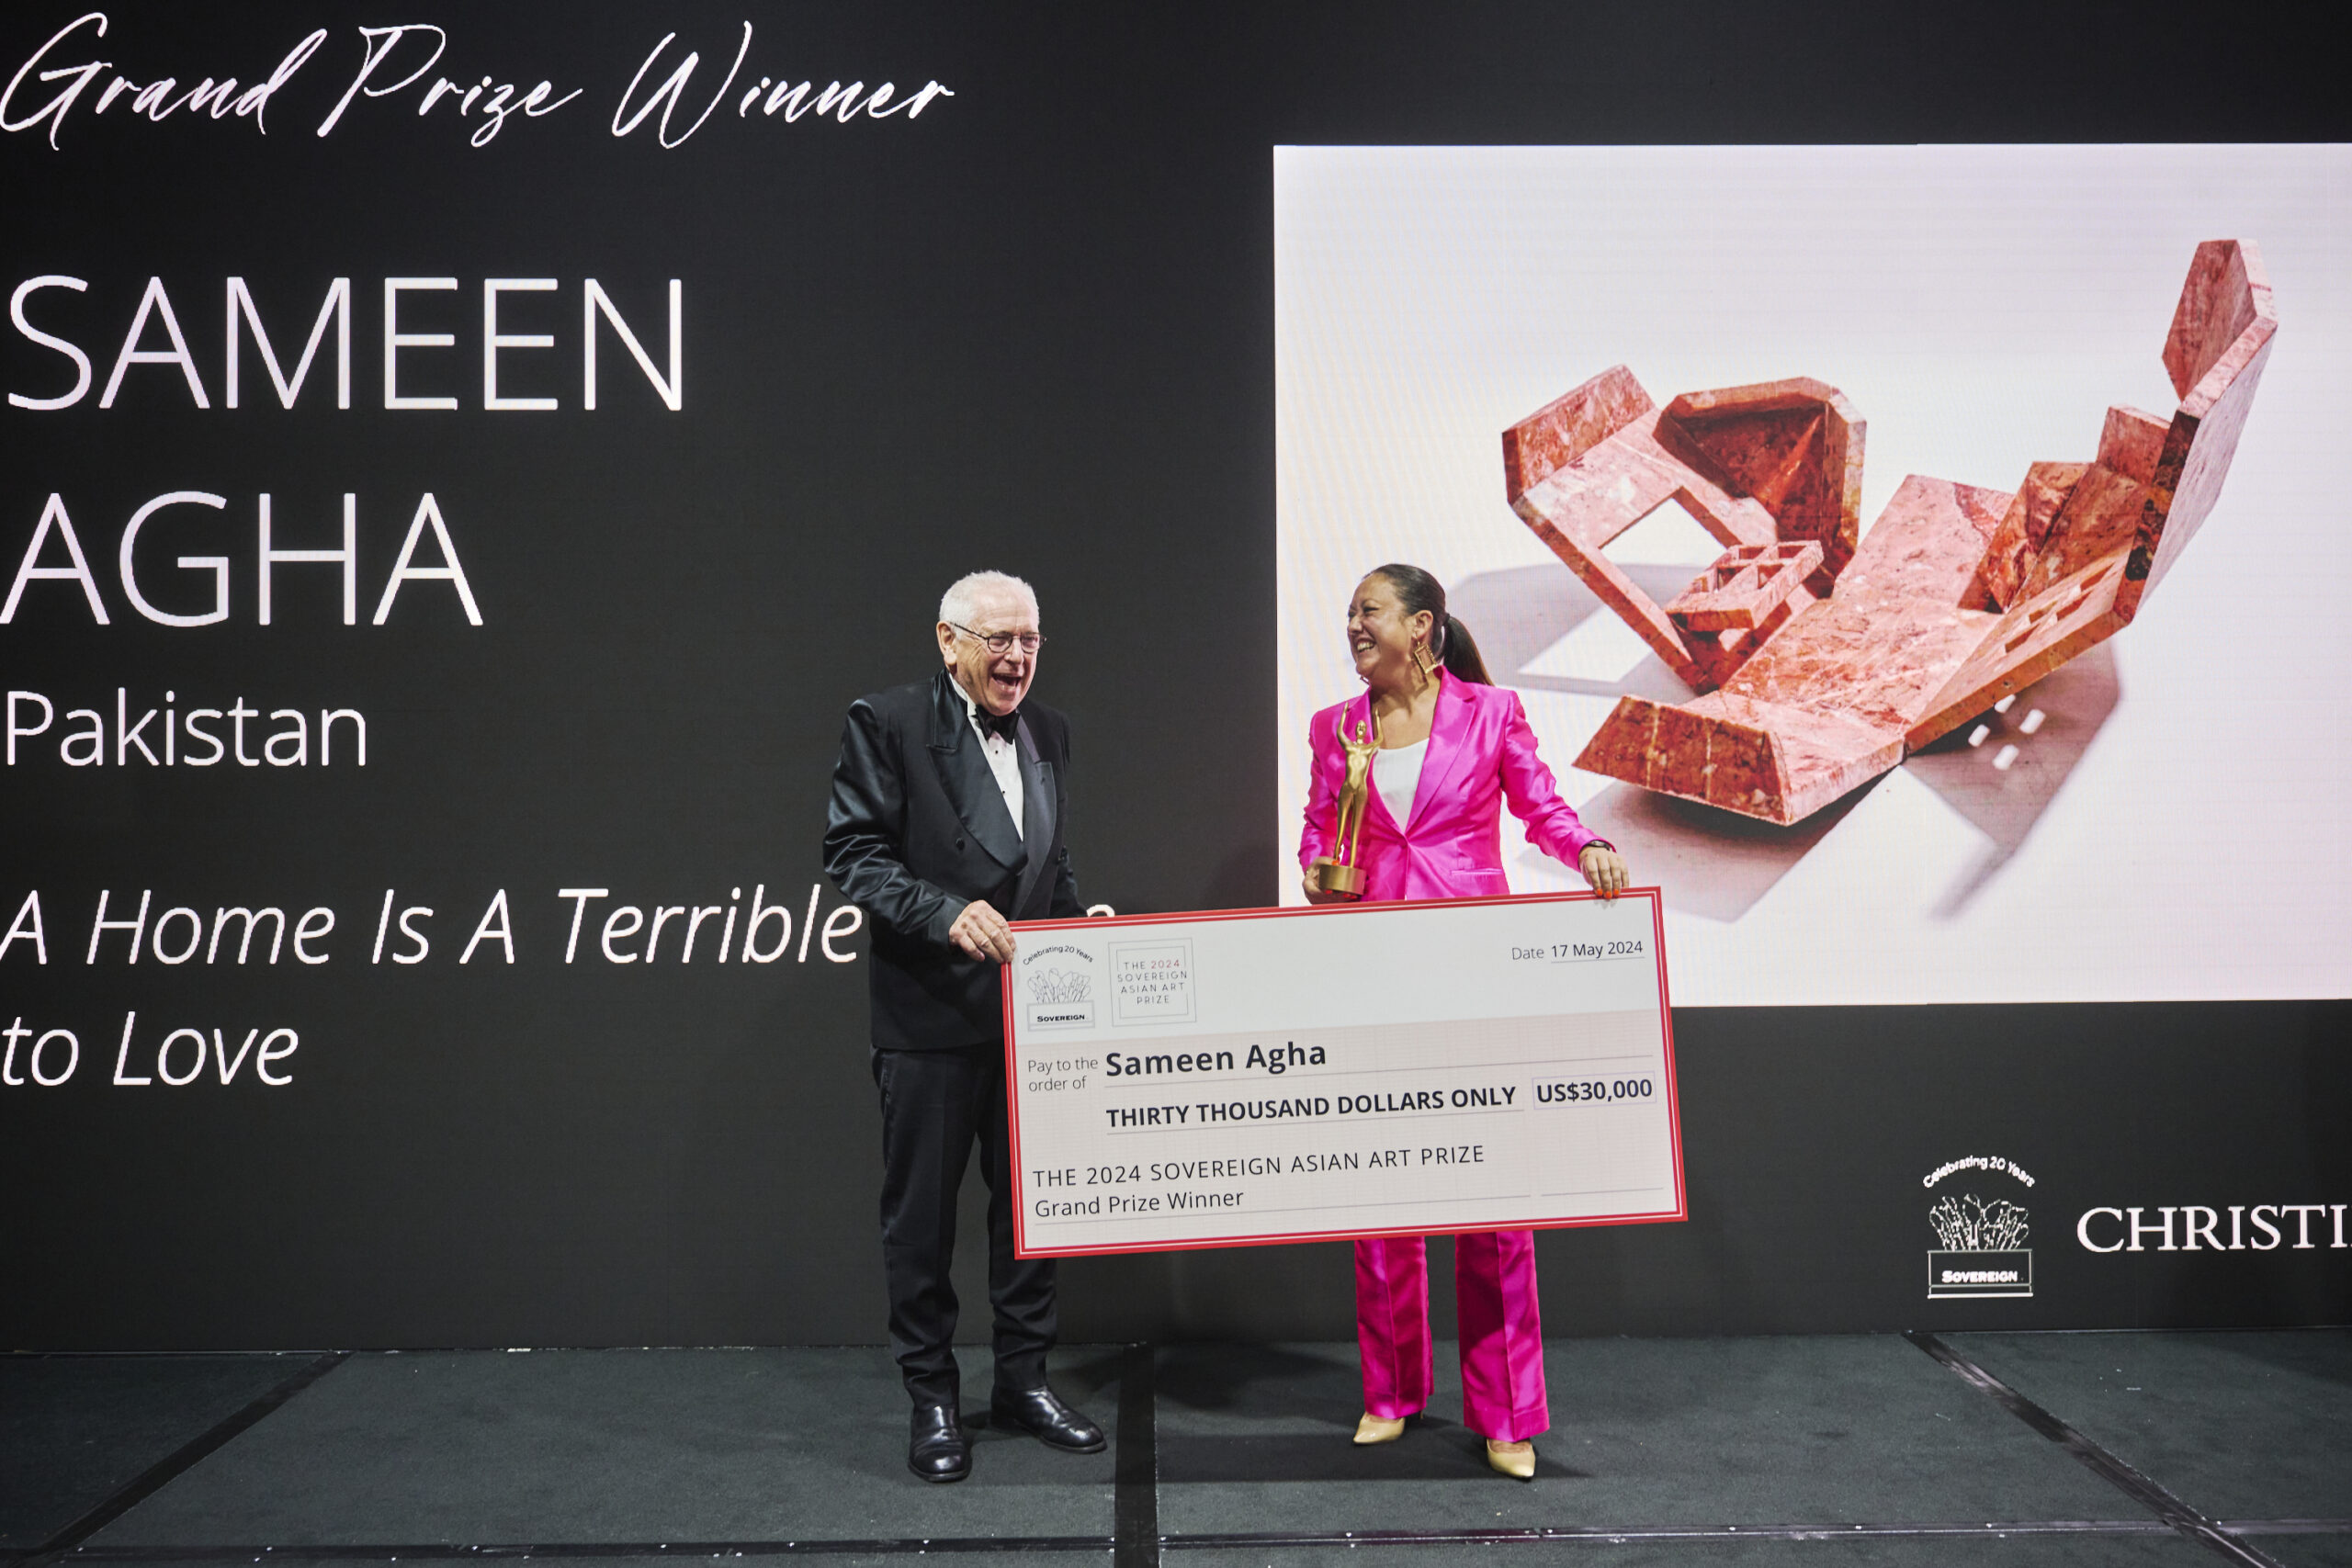 The Grand Prize Winner of The 2024 Sovereign Asian Art Prize image